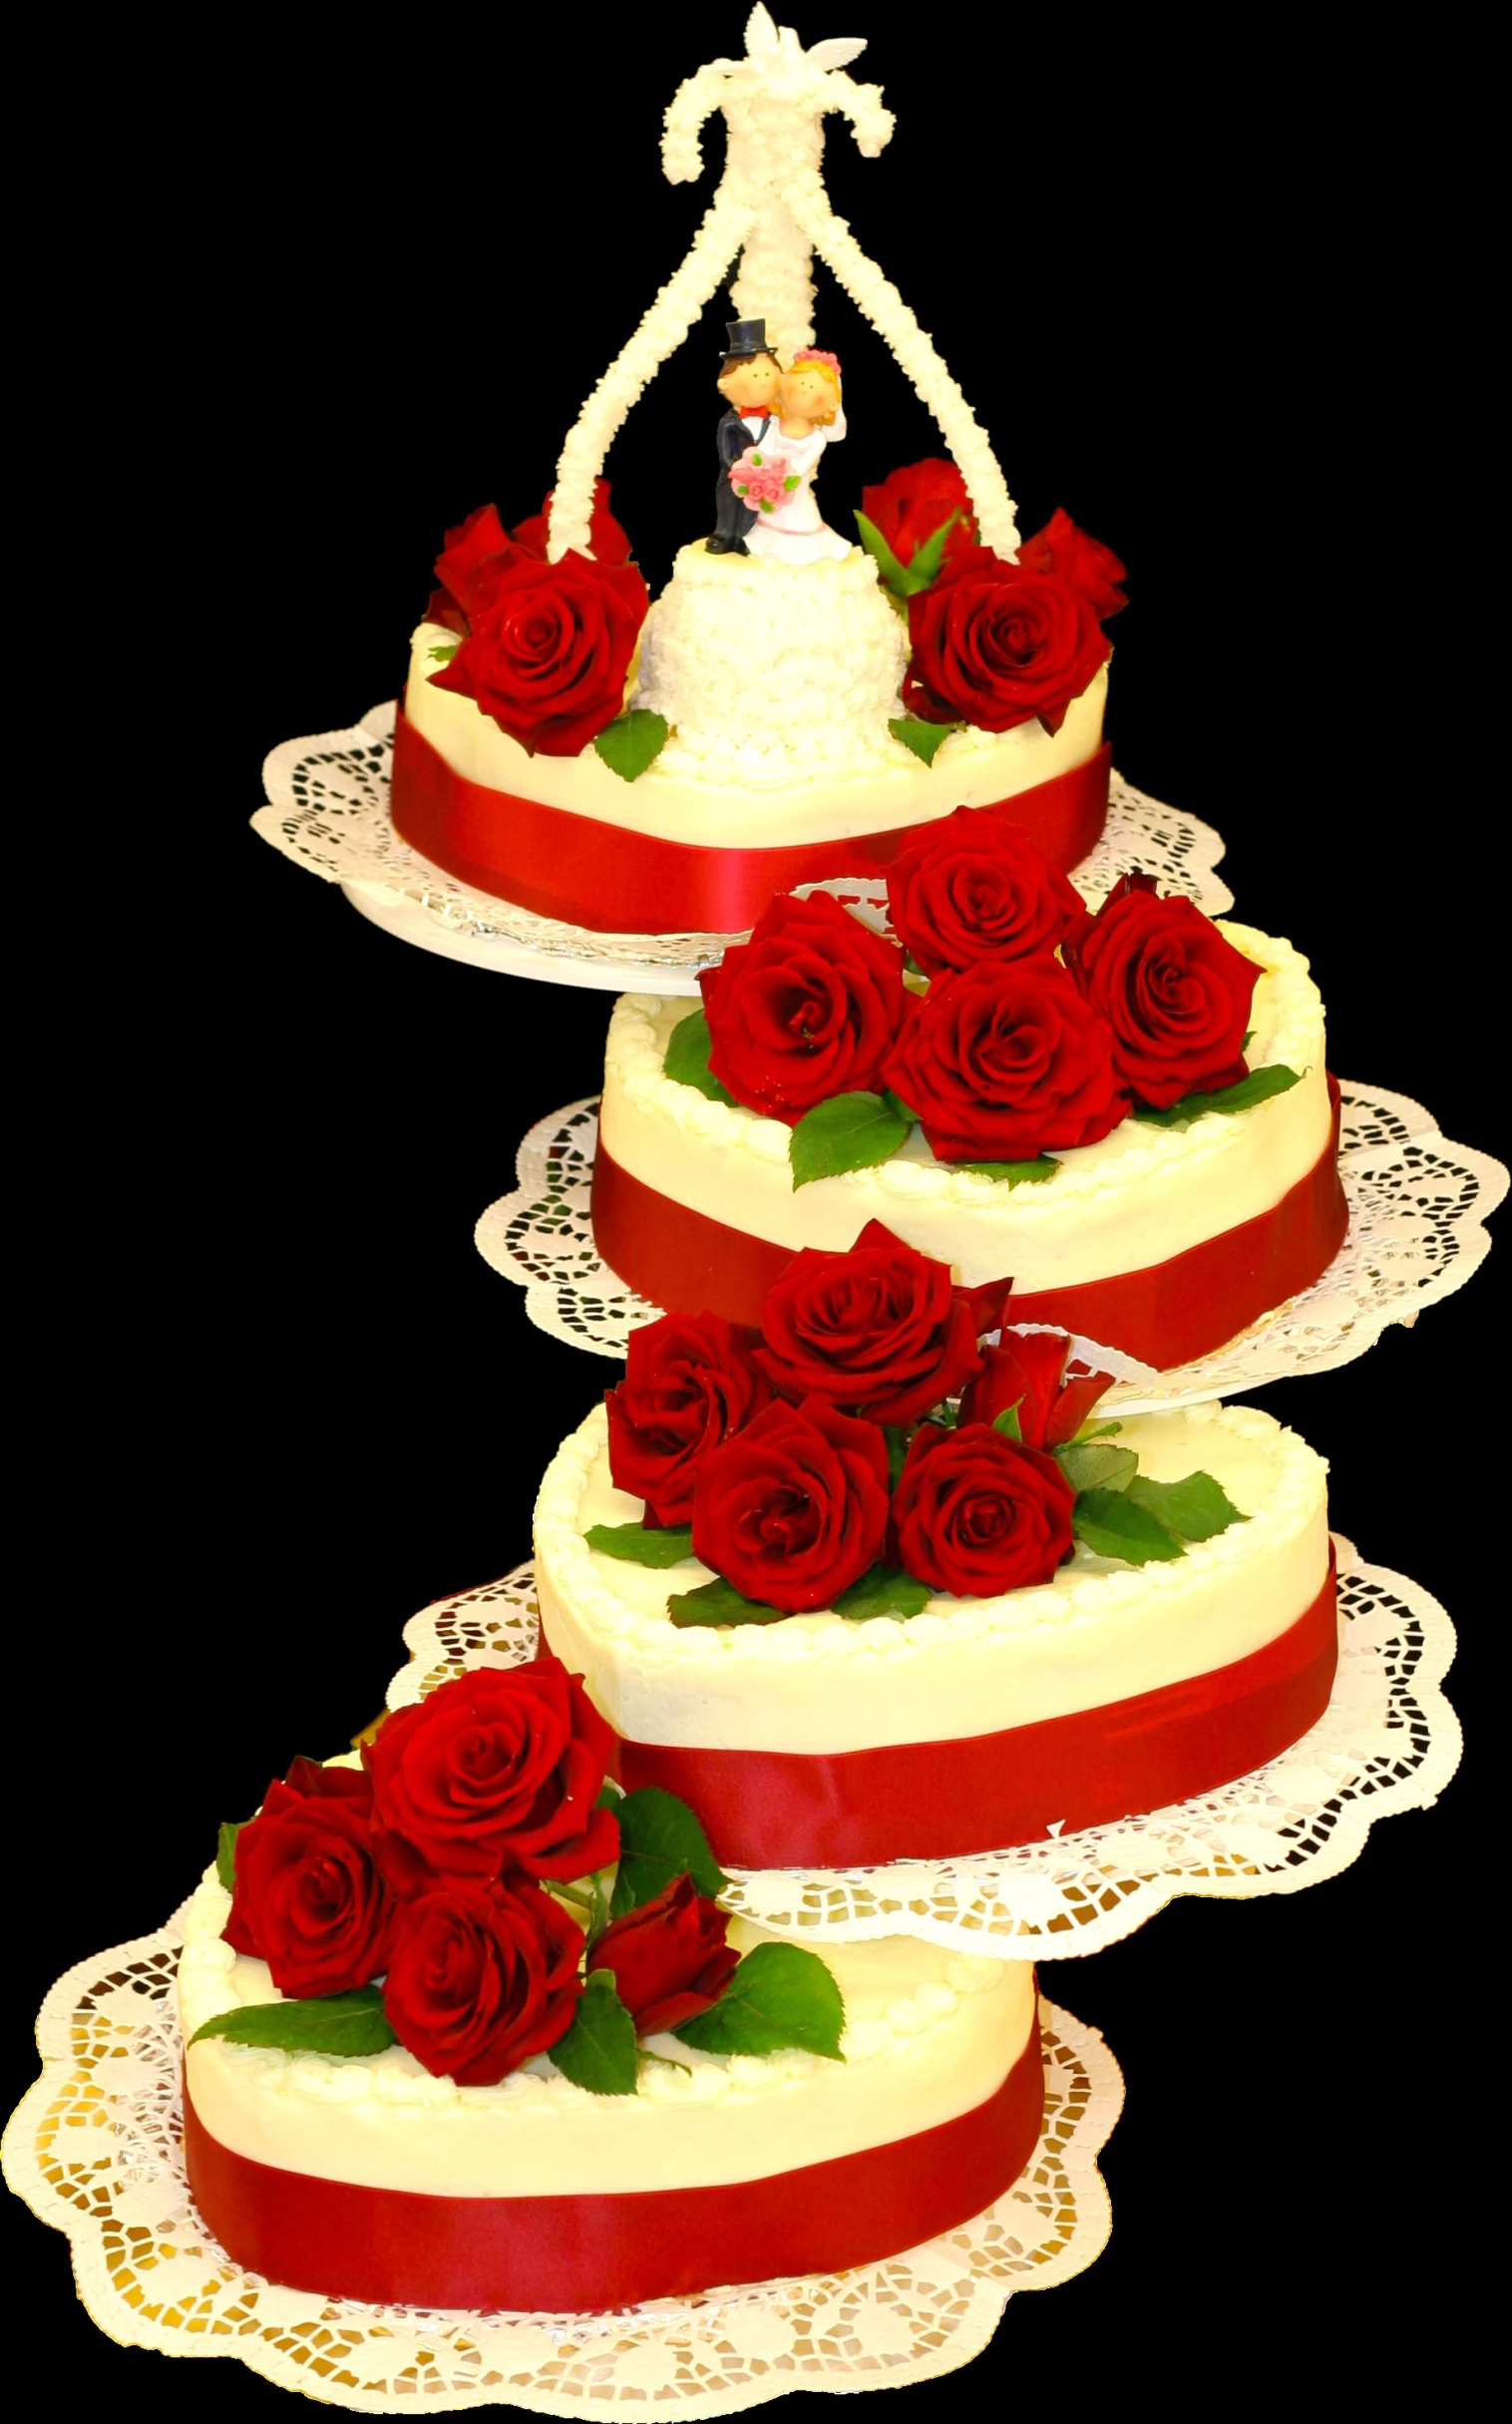 a triple layer cake topped with red roses